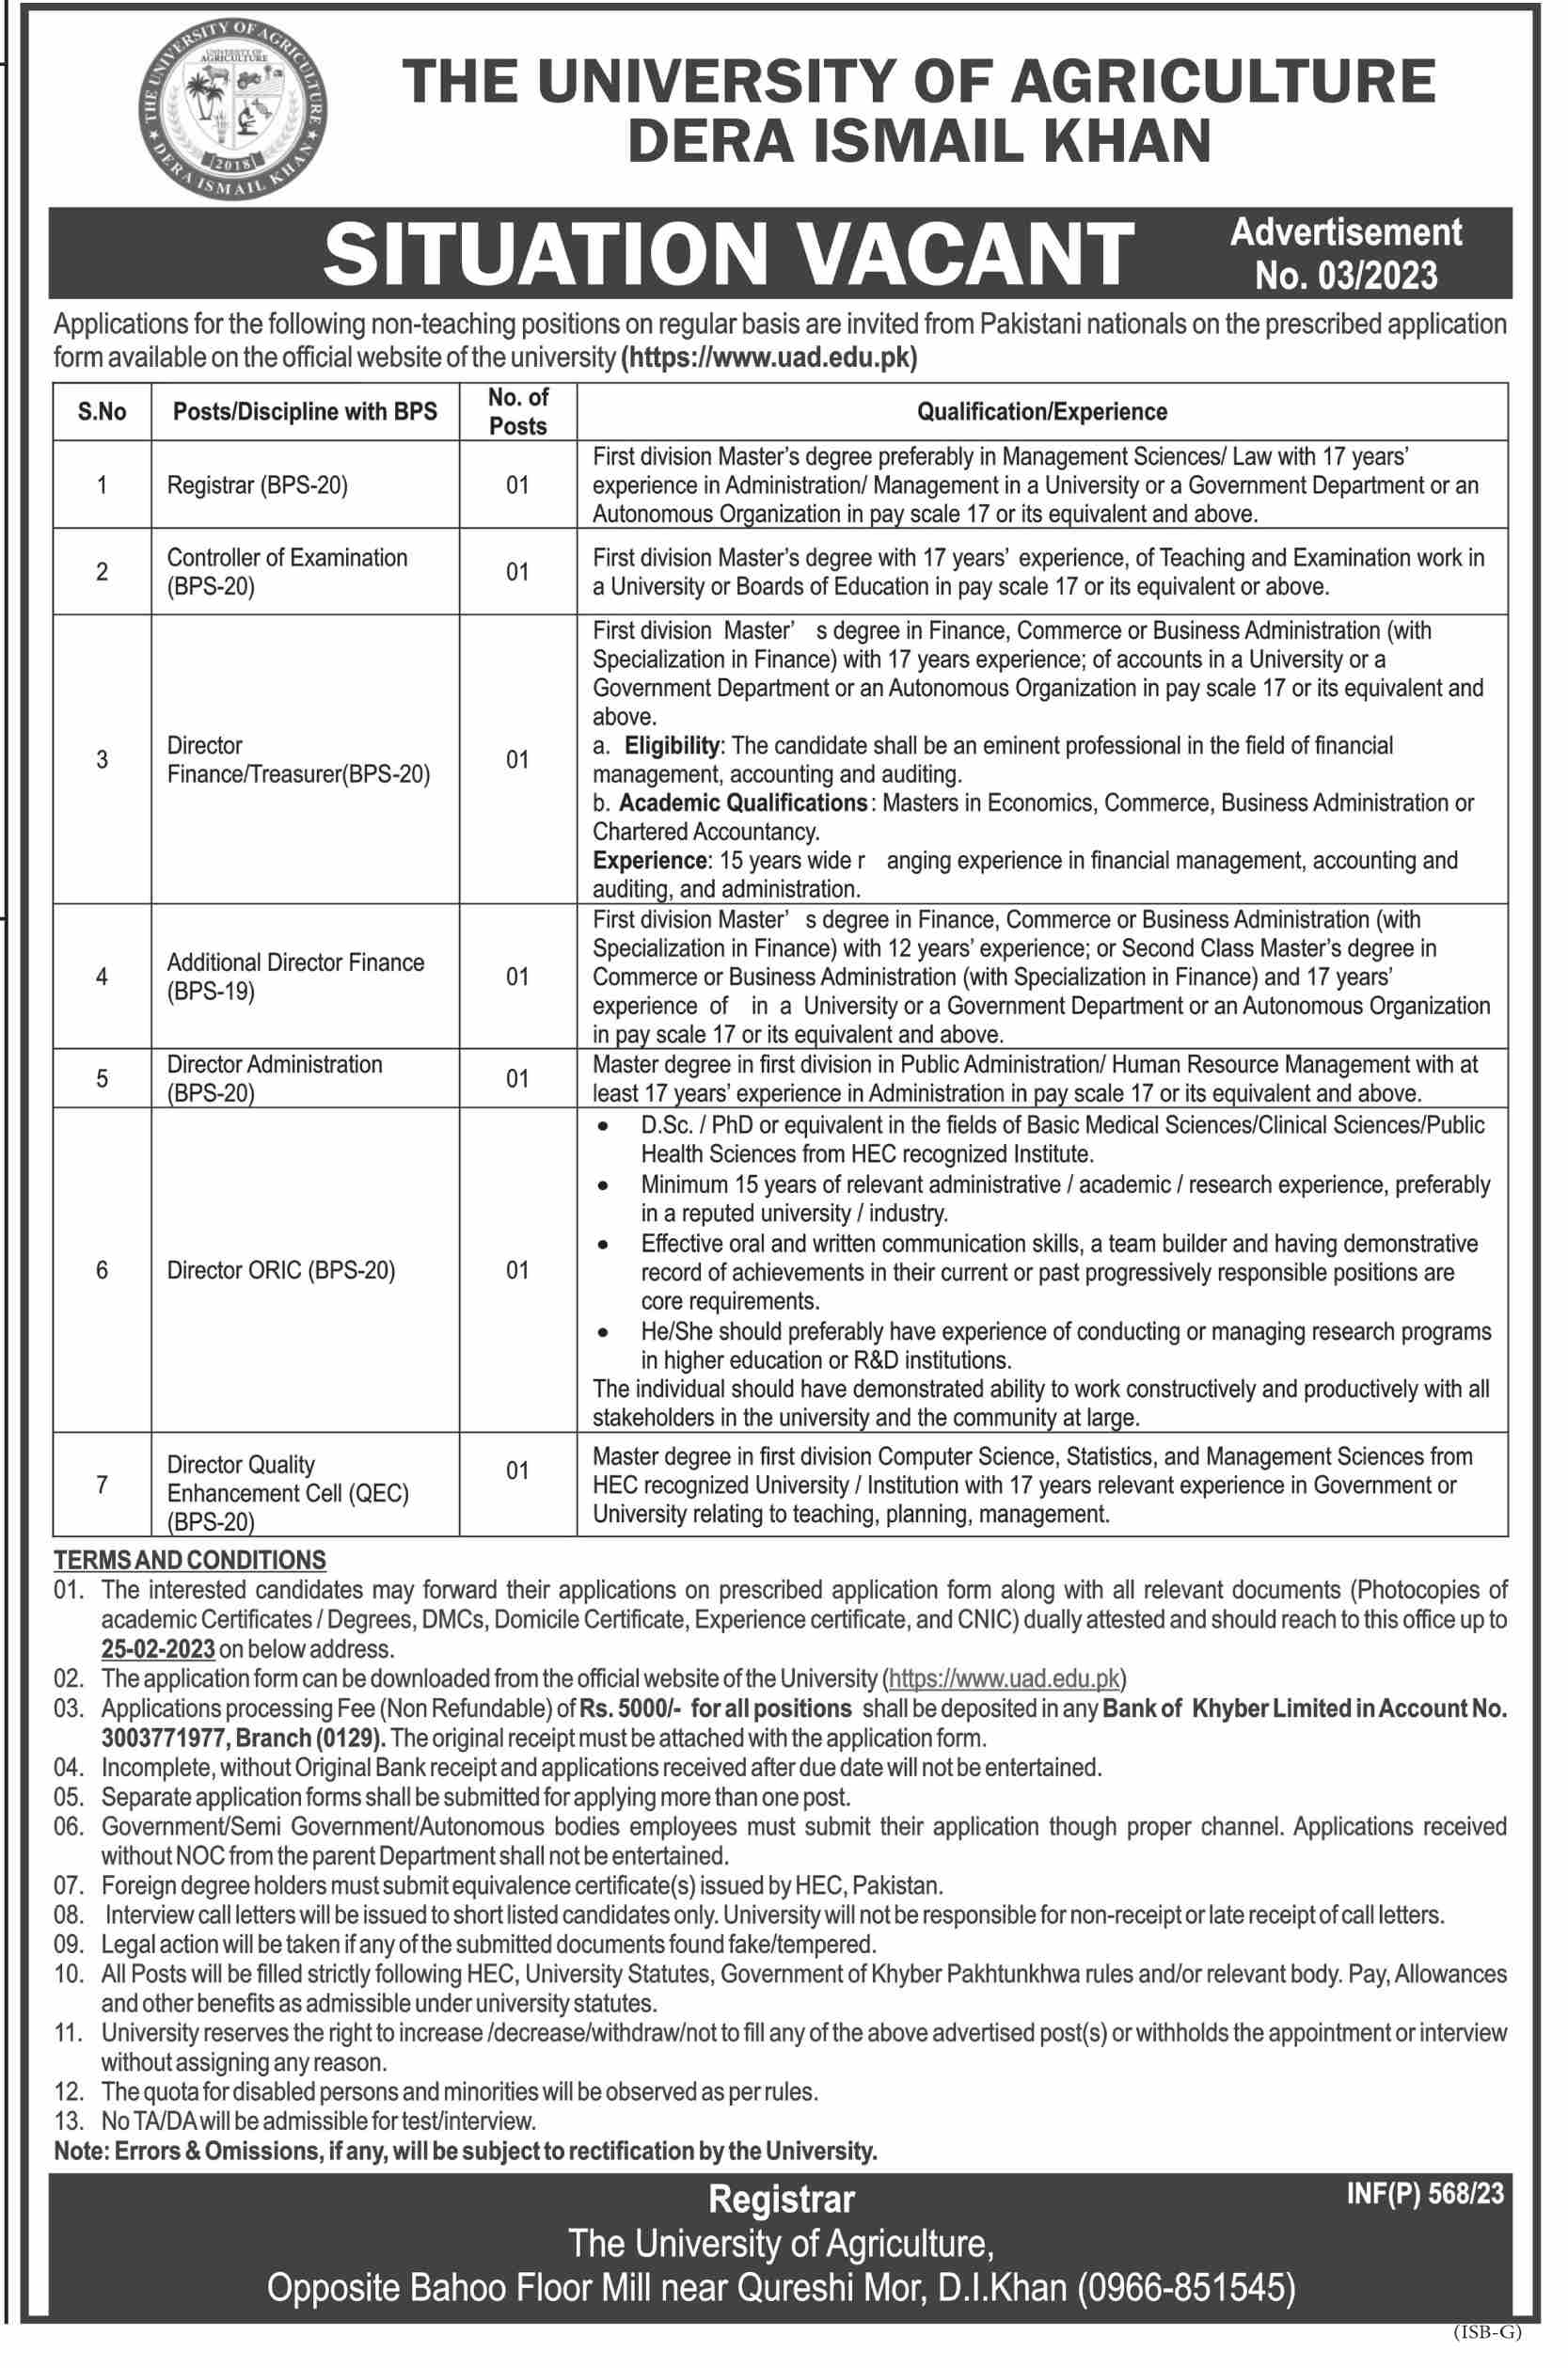 Latest The University Of Agriculture Management Posts Dera Ismail Khan 2023